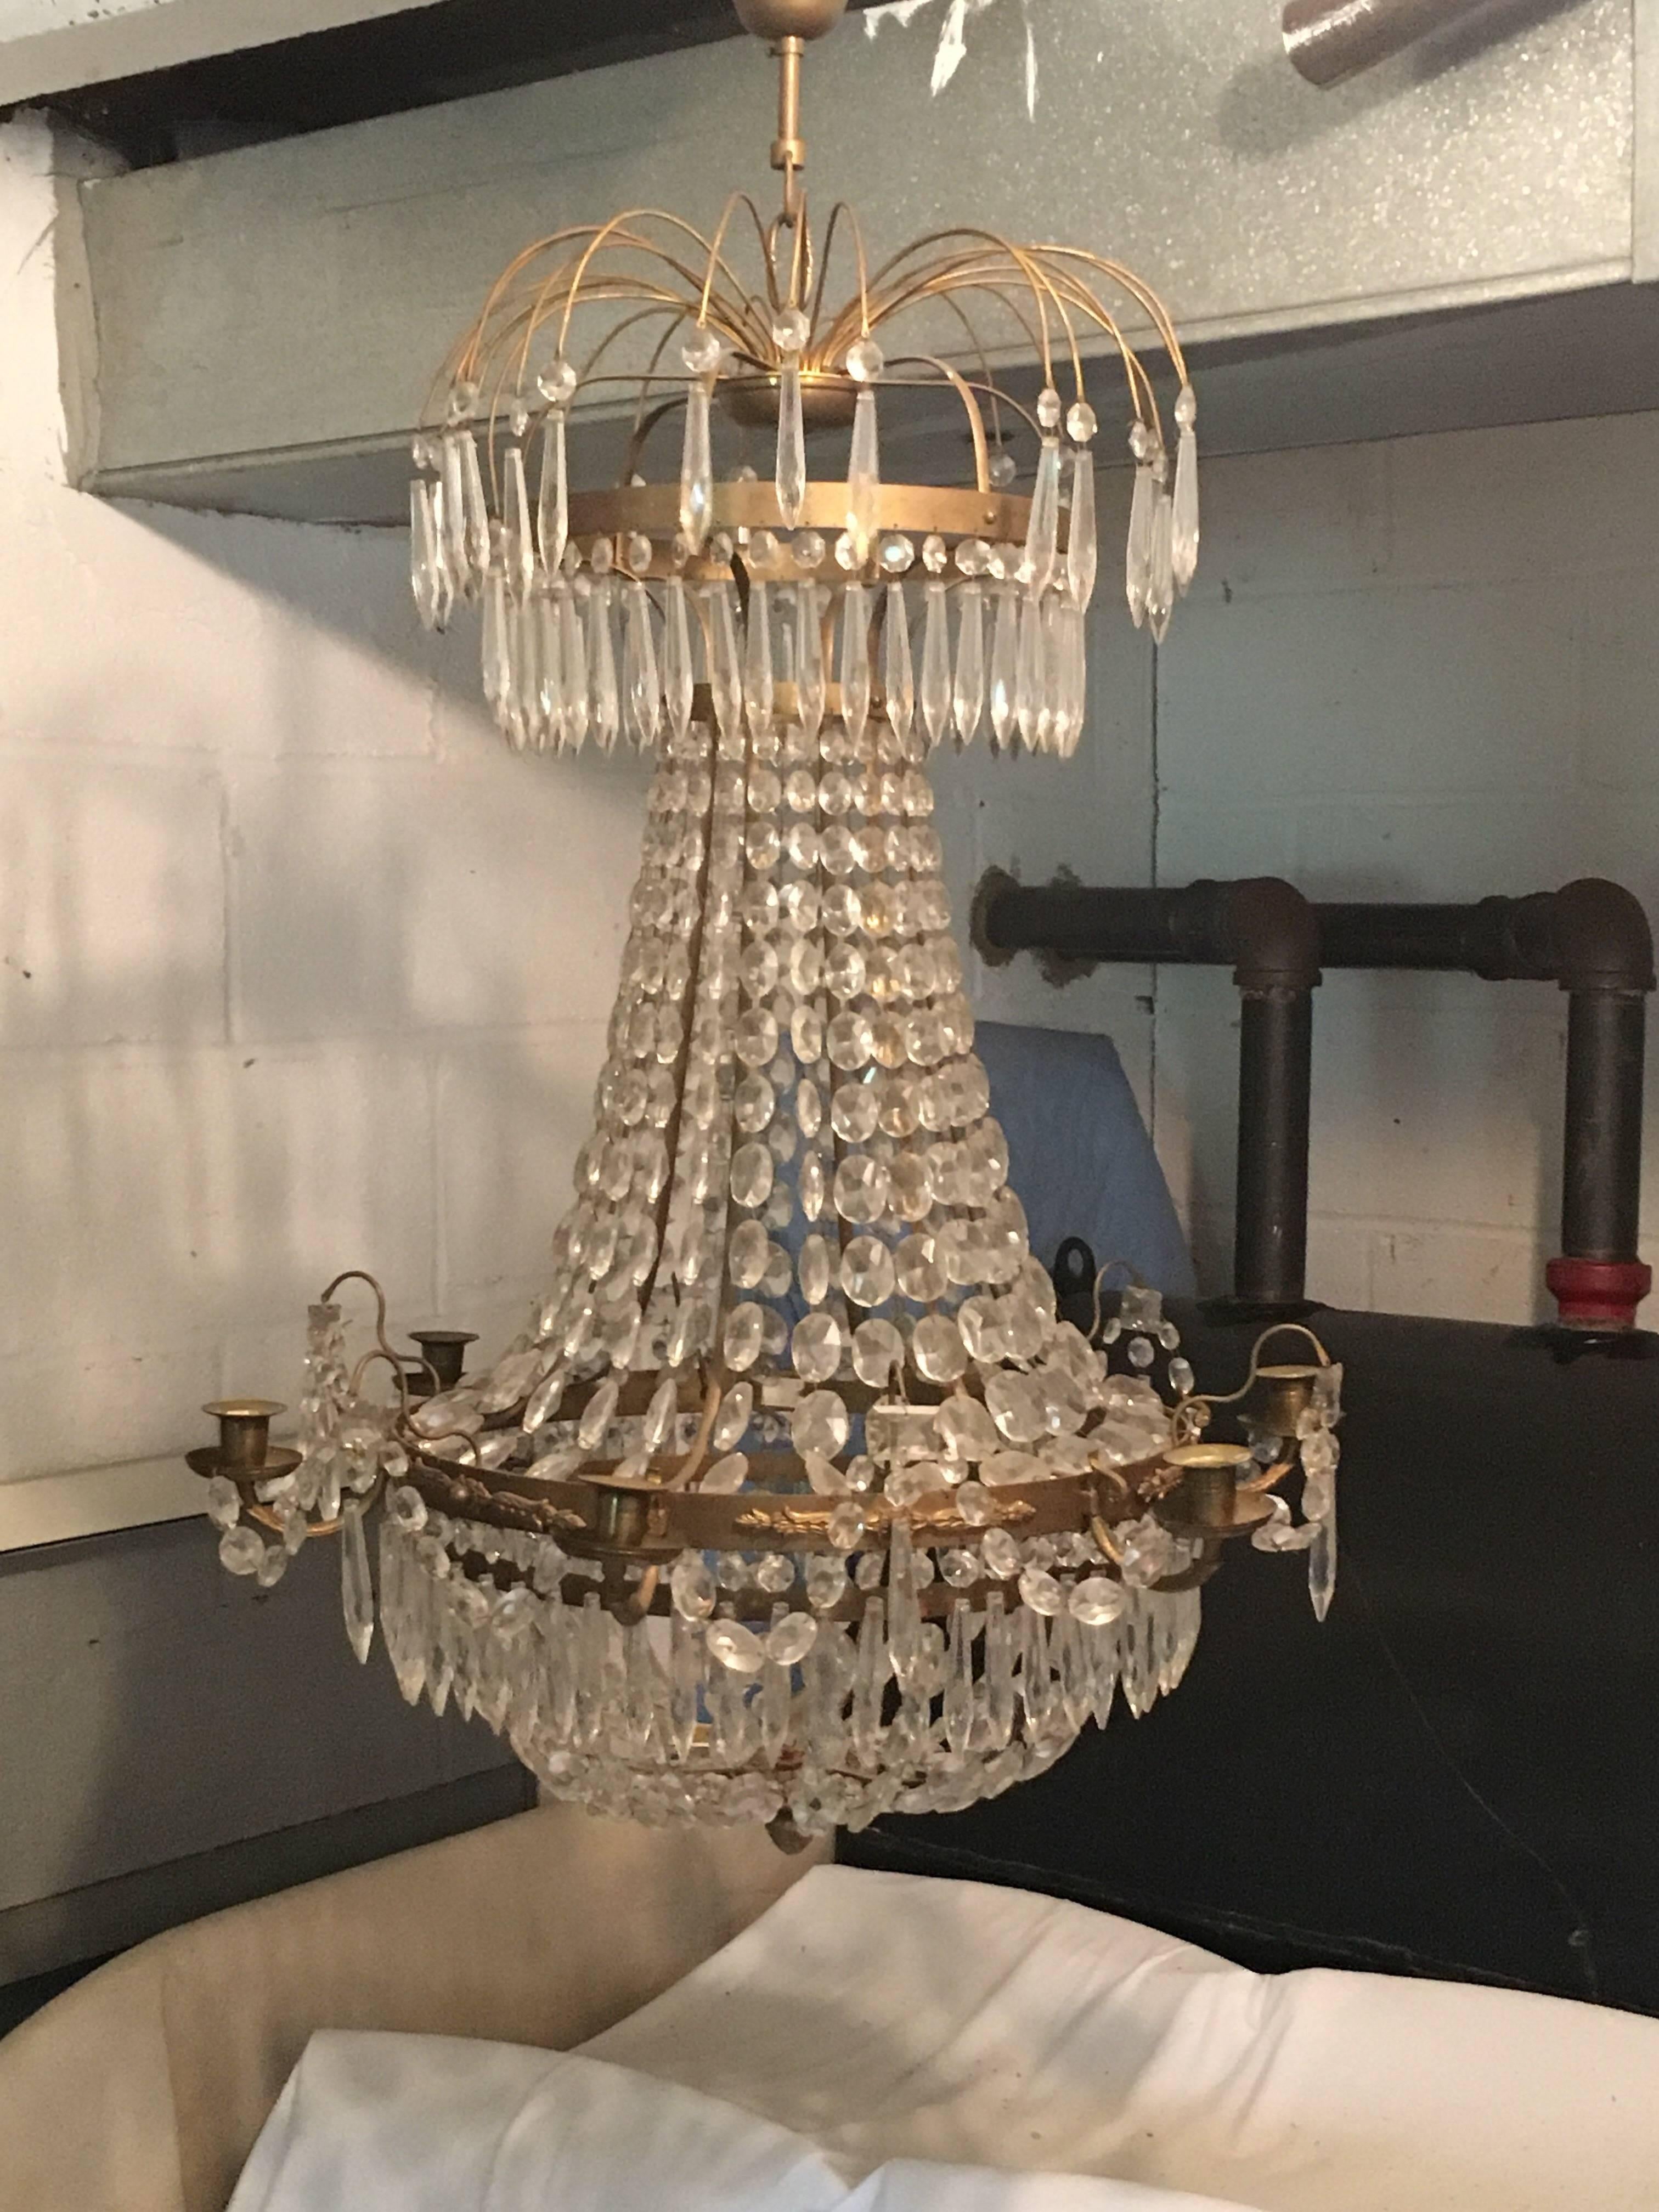 Absolutely gorgeous Swedish brass and crystal Gustavian style chandelier, ca. 1900. This piece has never been wired for electricity and retains its regal splendor as a candlelit chandelier. Would be a stunning centerpiece in a city or country dining